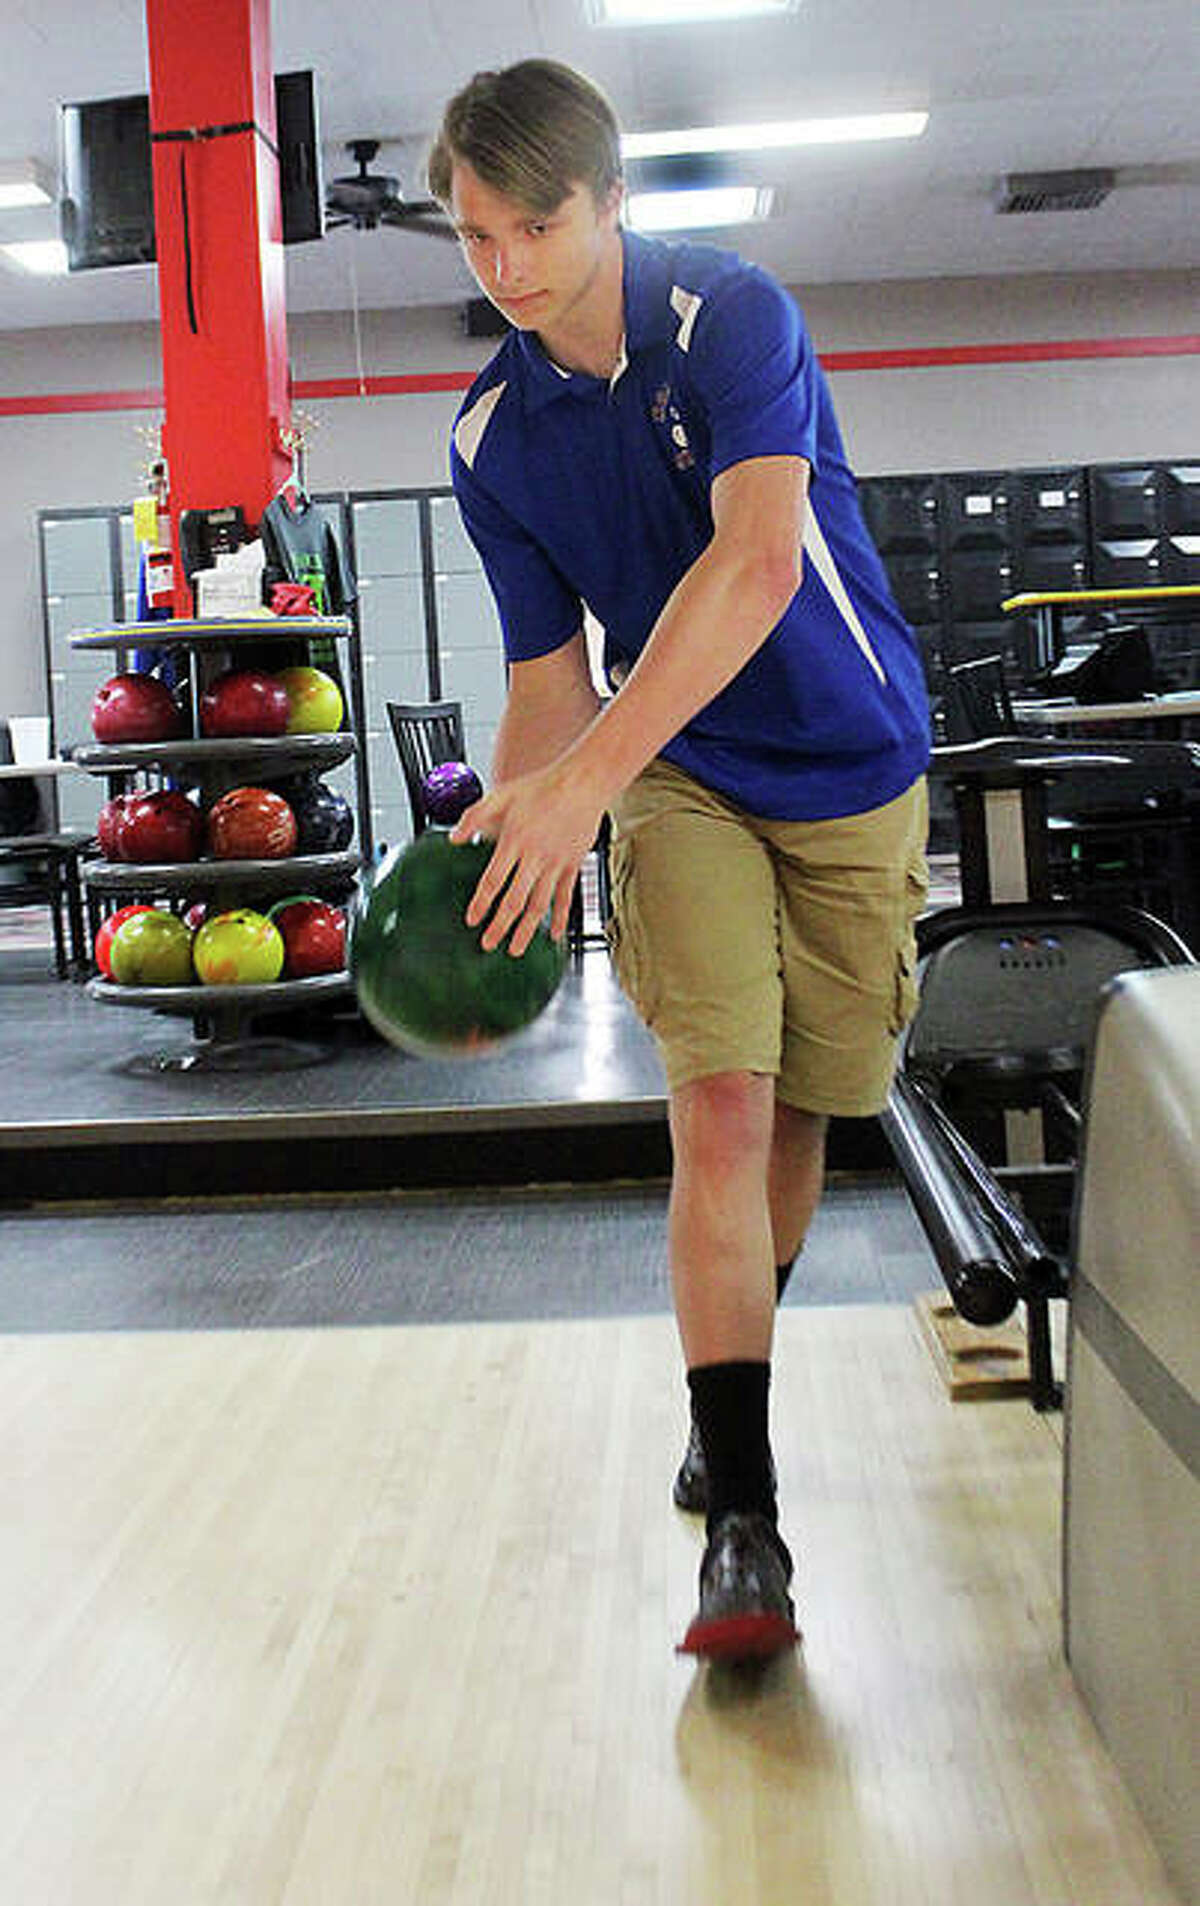 Logan Wonders of Roxana overcame a rough start to the 2021 season and finished strong with high games of 278 and 277 and high series of 727 and 744 in his last two matches.